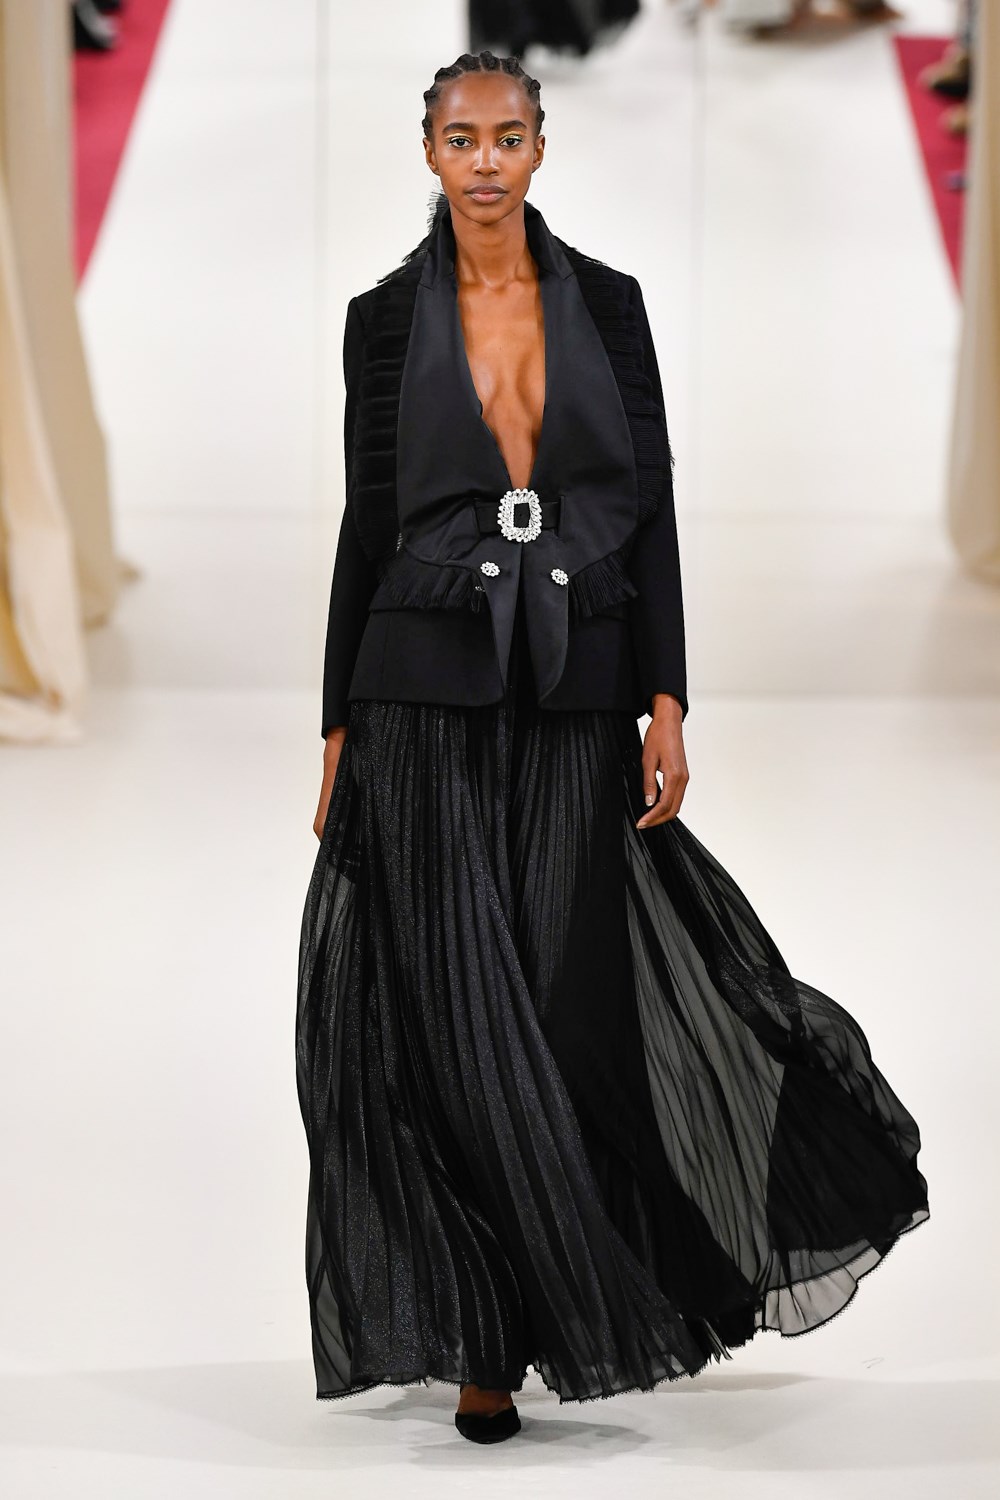 Alexis Mabille Spring 2022 Couture Fashion Show